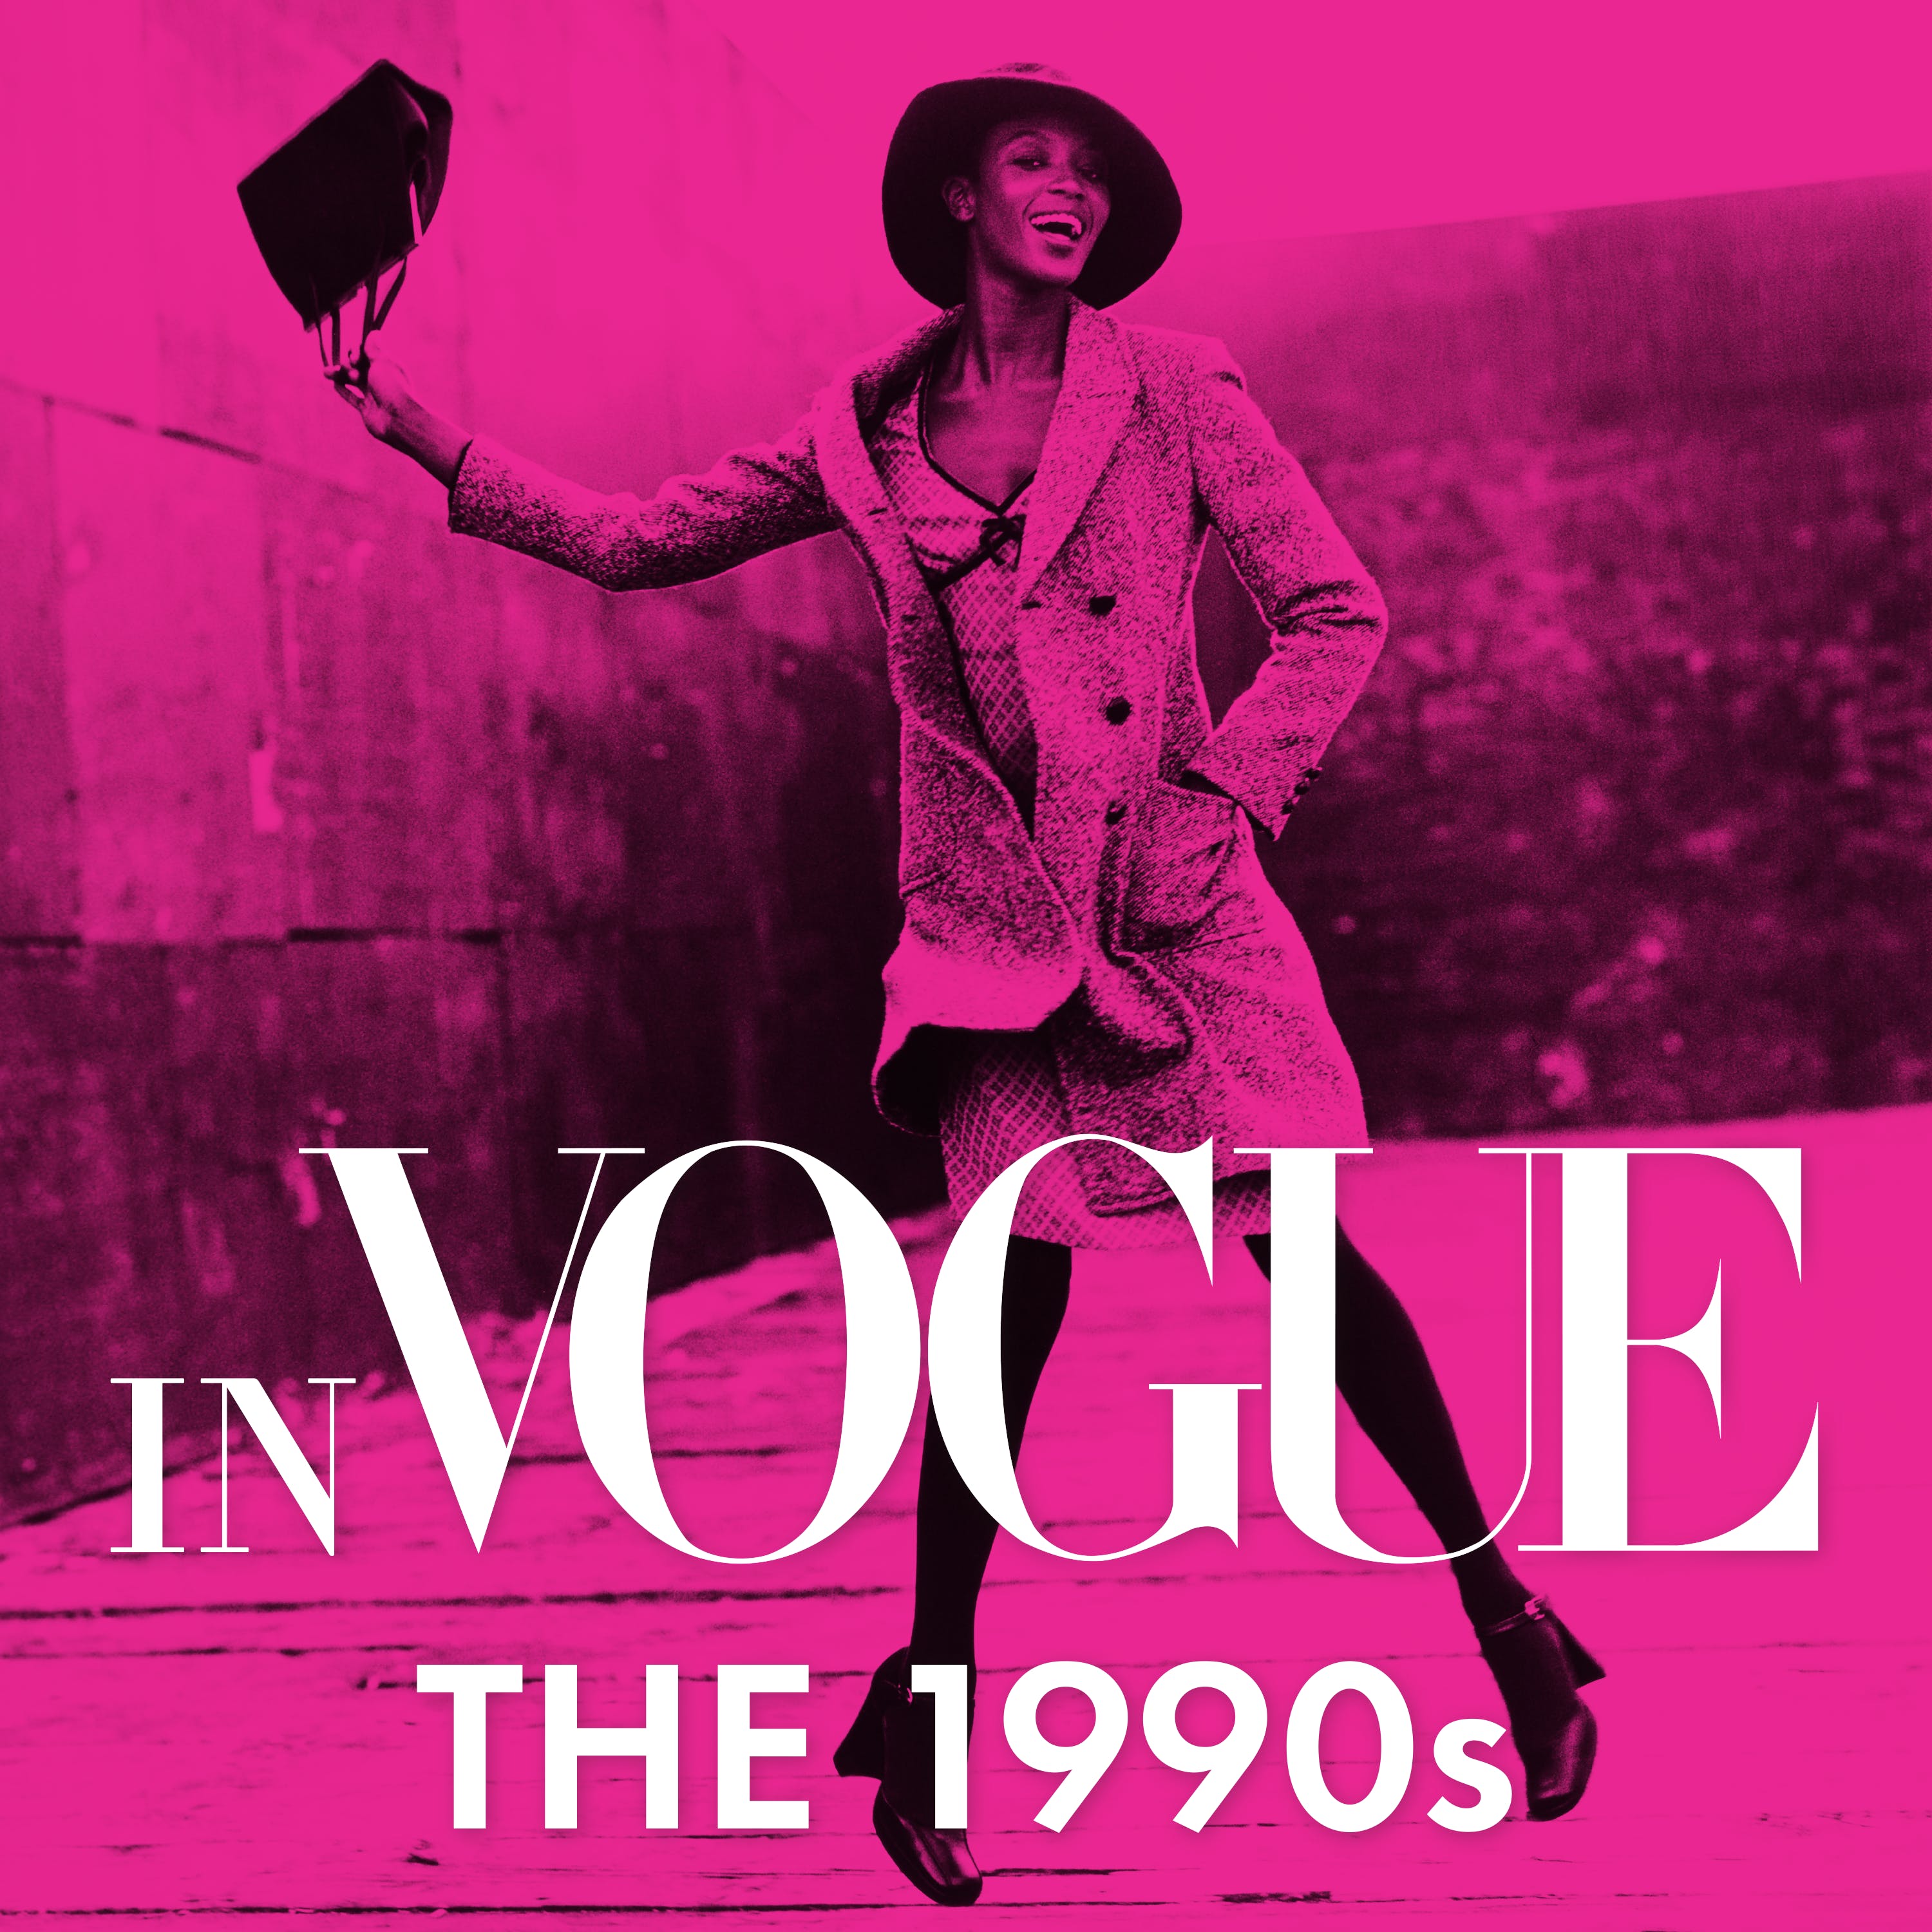 Thumbnail for "Special Presentation of In VOGUE: The 1990s -- It Bags and It Girls".